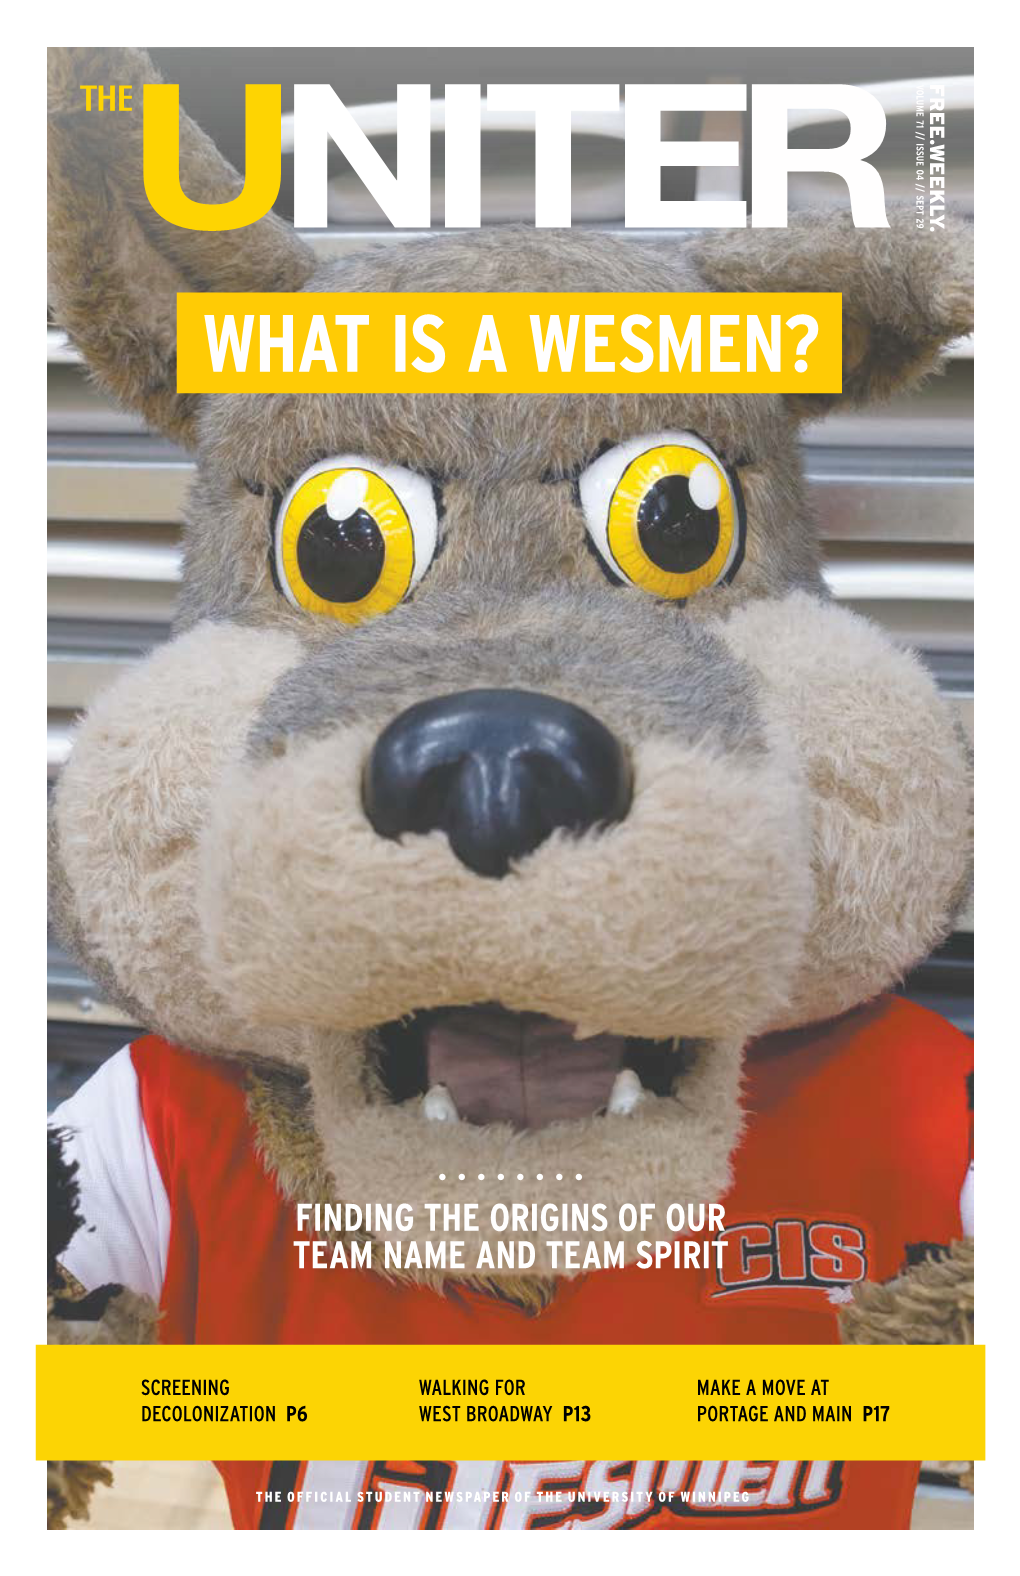 What Is a Wesmen?